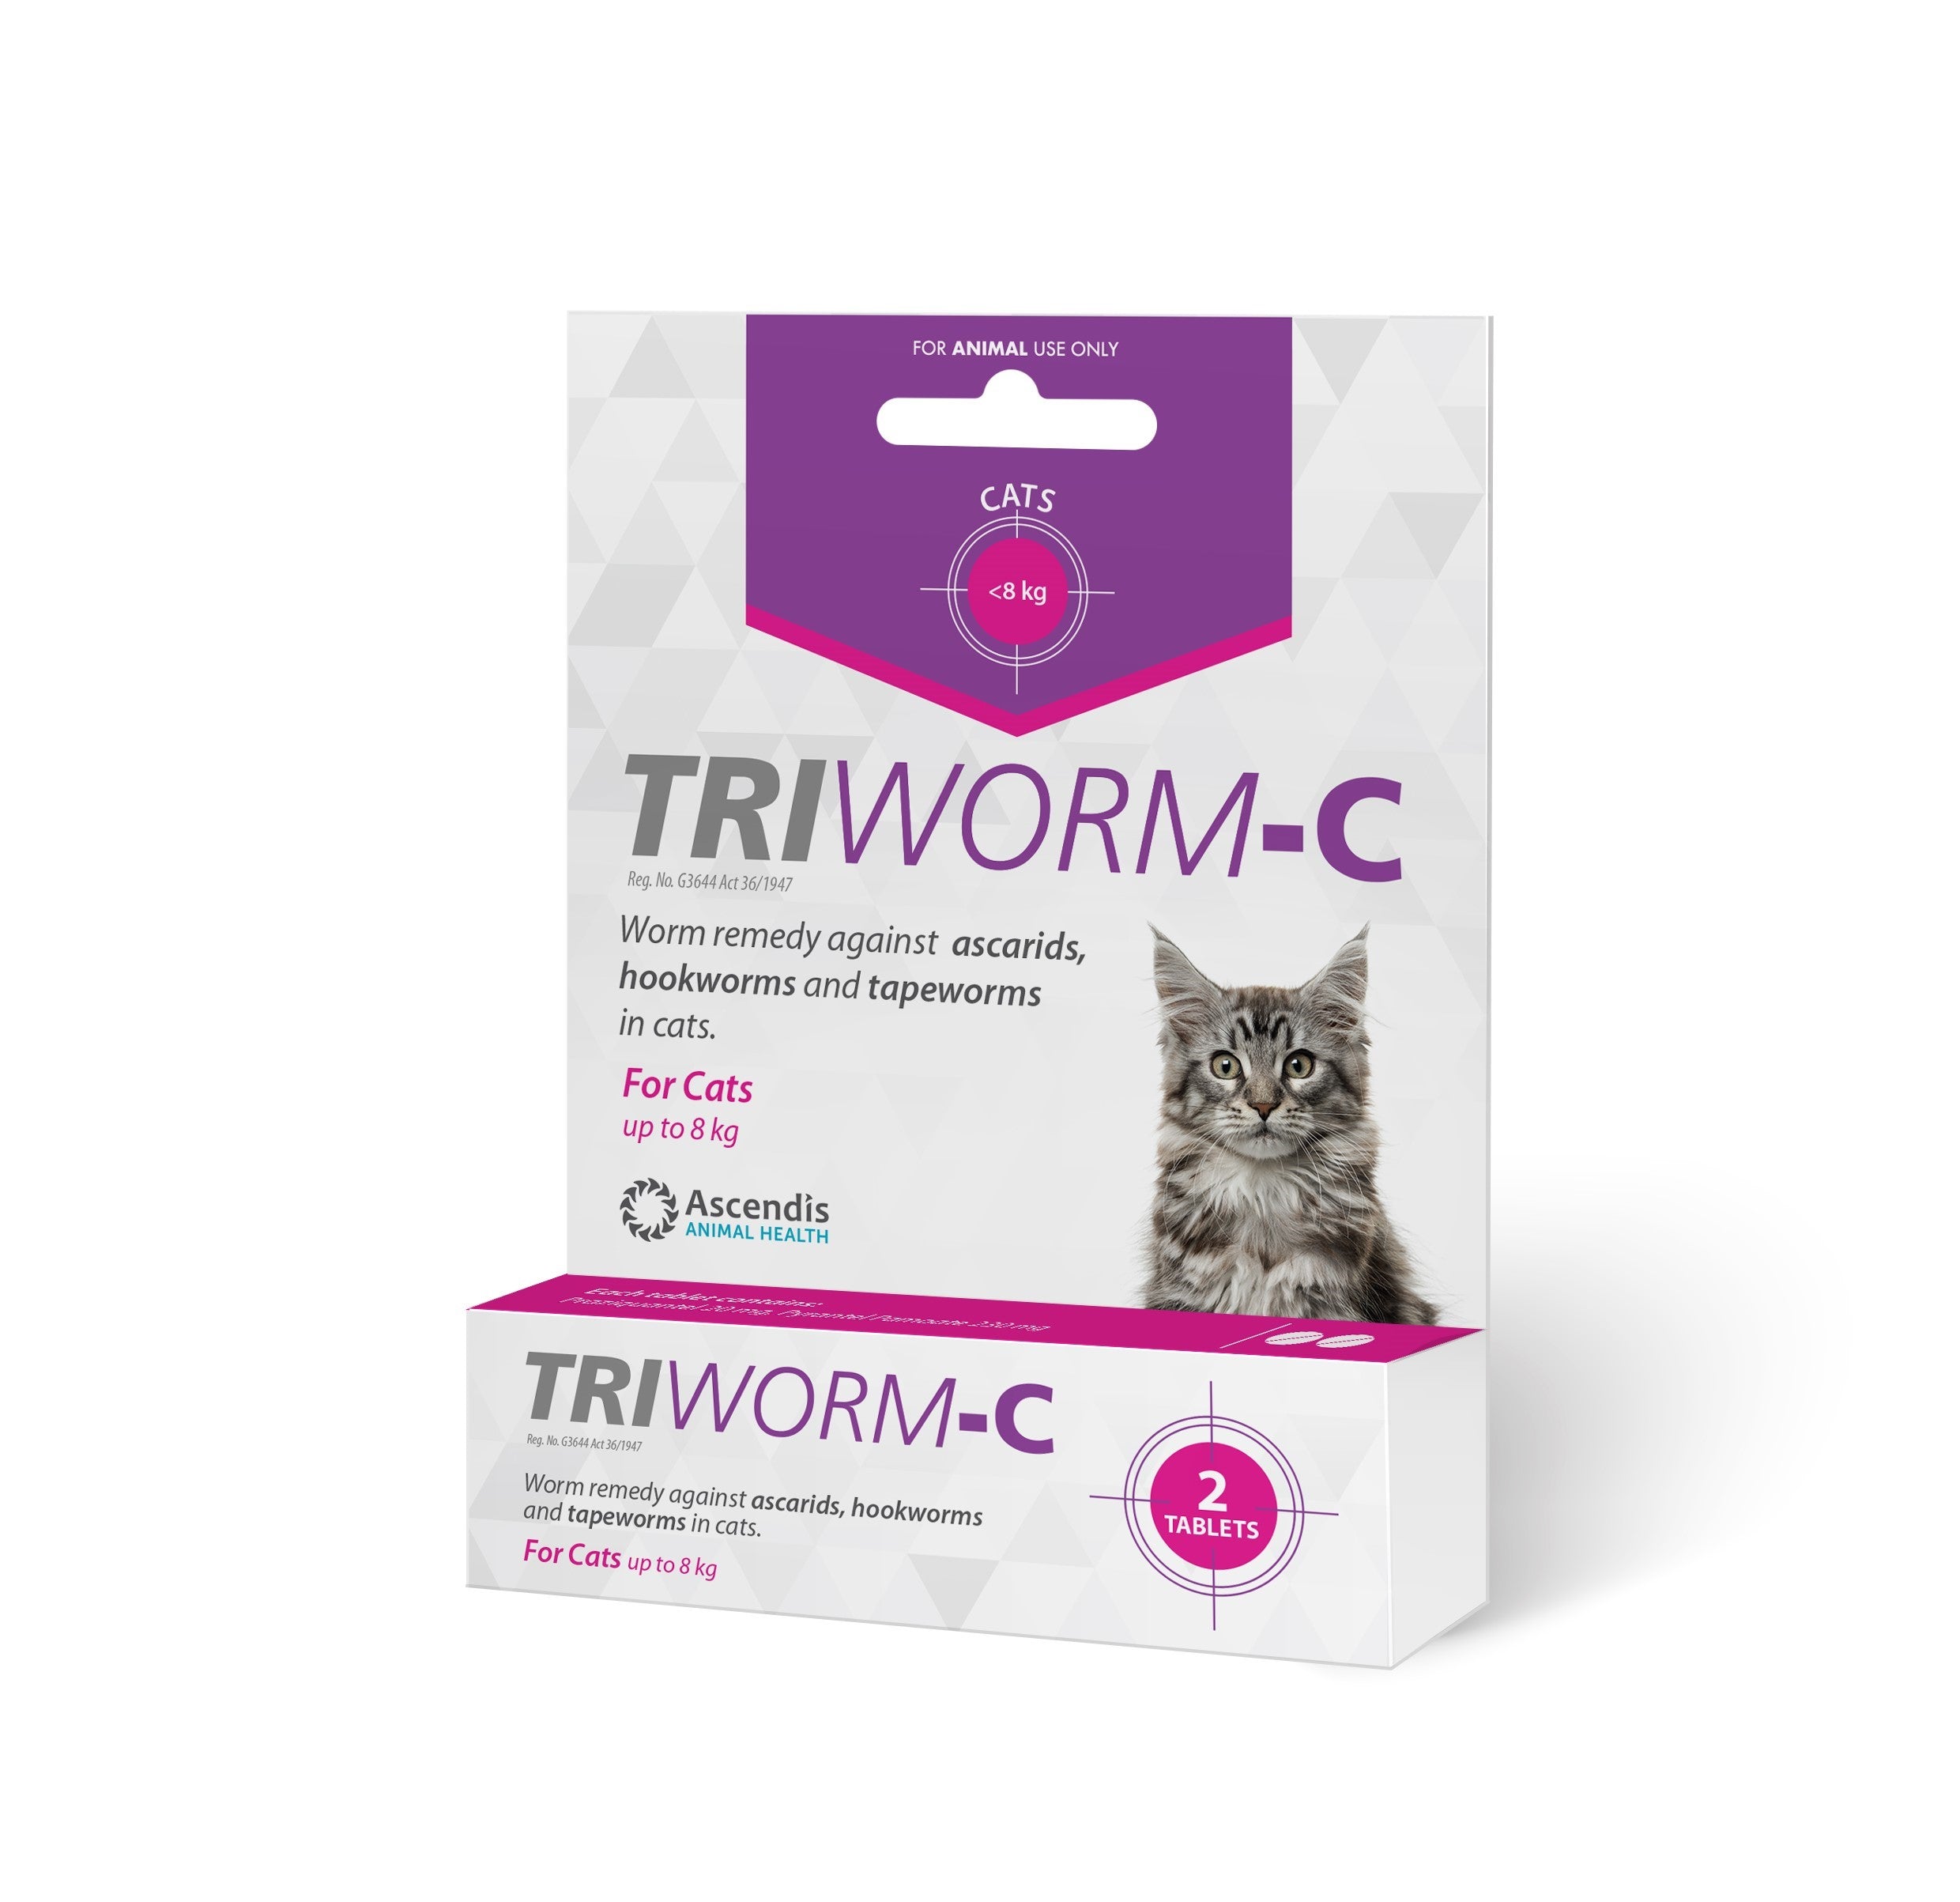 TRIWORM-C 2TB UP TO 8KG